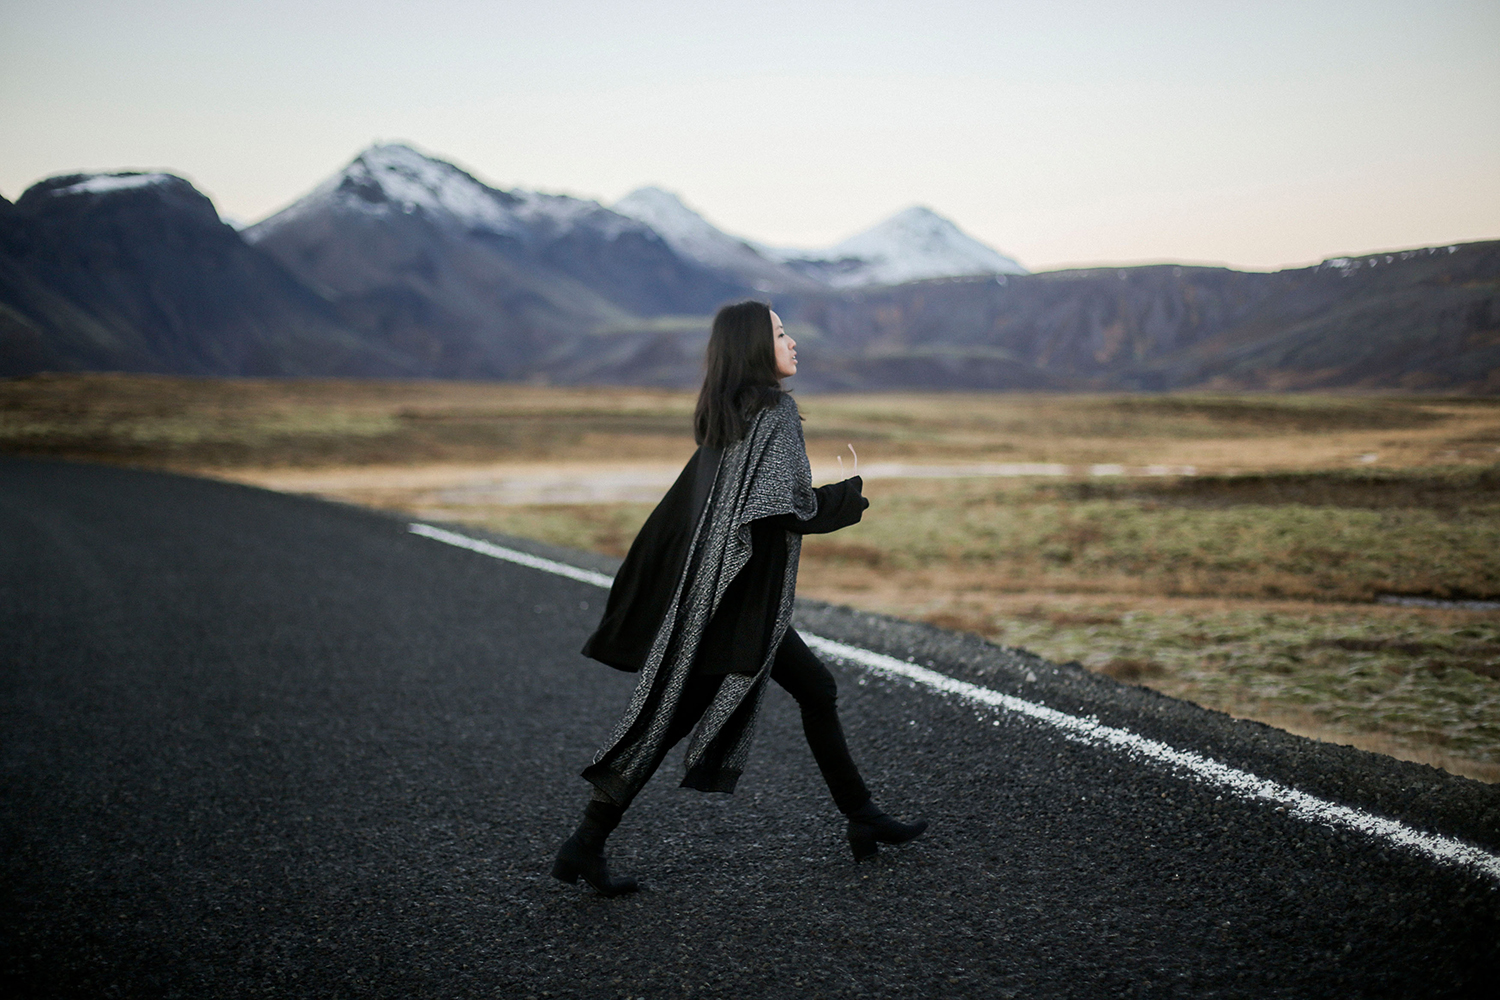 IHEARTALICE.DE – Fashion, Lifestyle & Travel-Diary from Berlin/Germany by Alice M. Huynh: Iceland Travel Diary / OOTD wearing Vagabond Boots, Acne Studios Jeans, Alexander Wang Knit Scarf at Thingvellir National Park